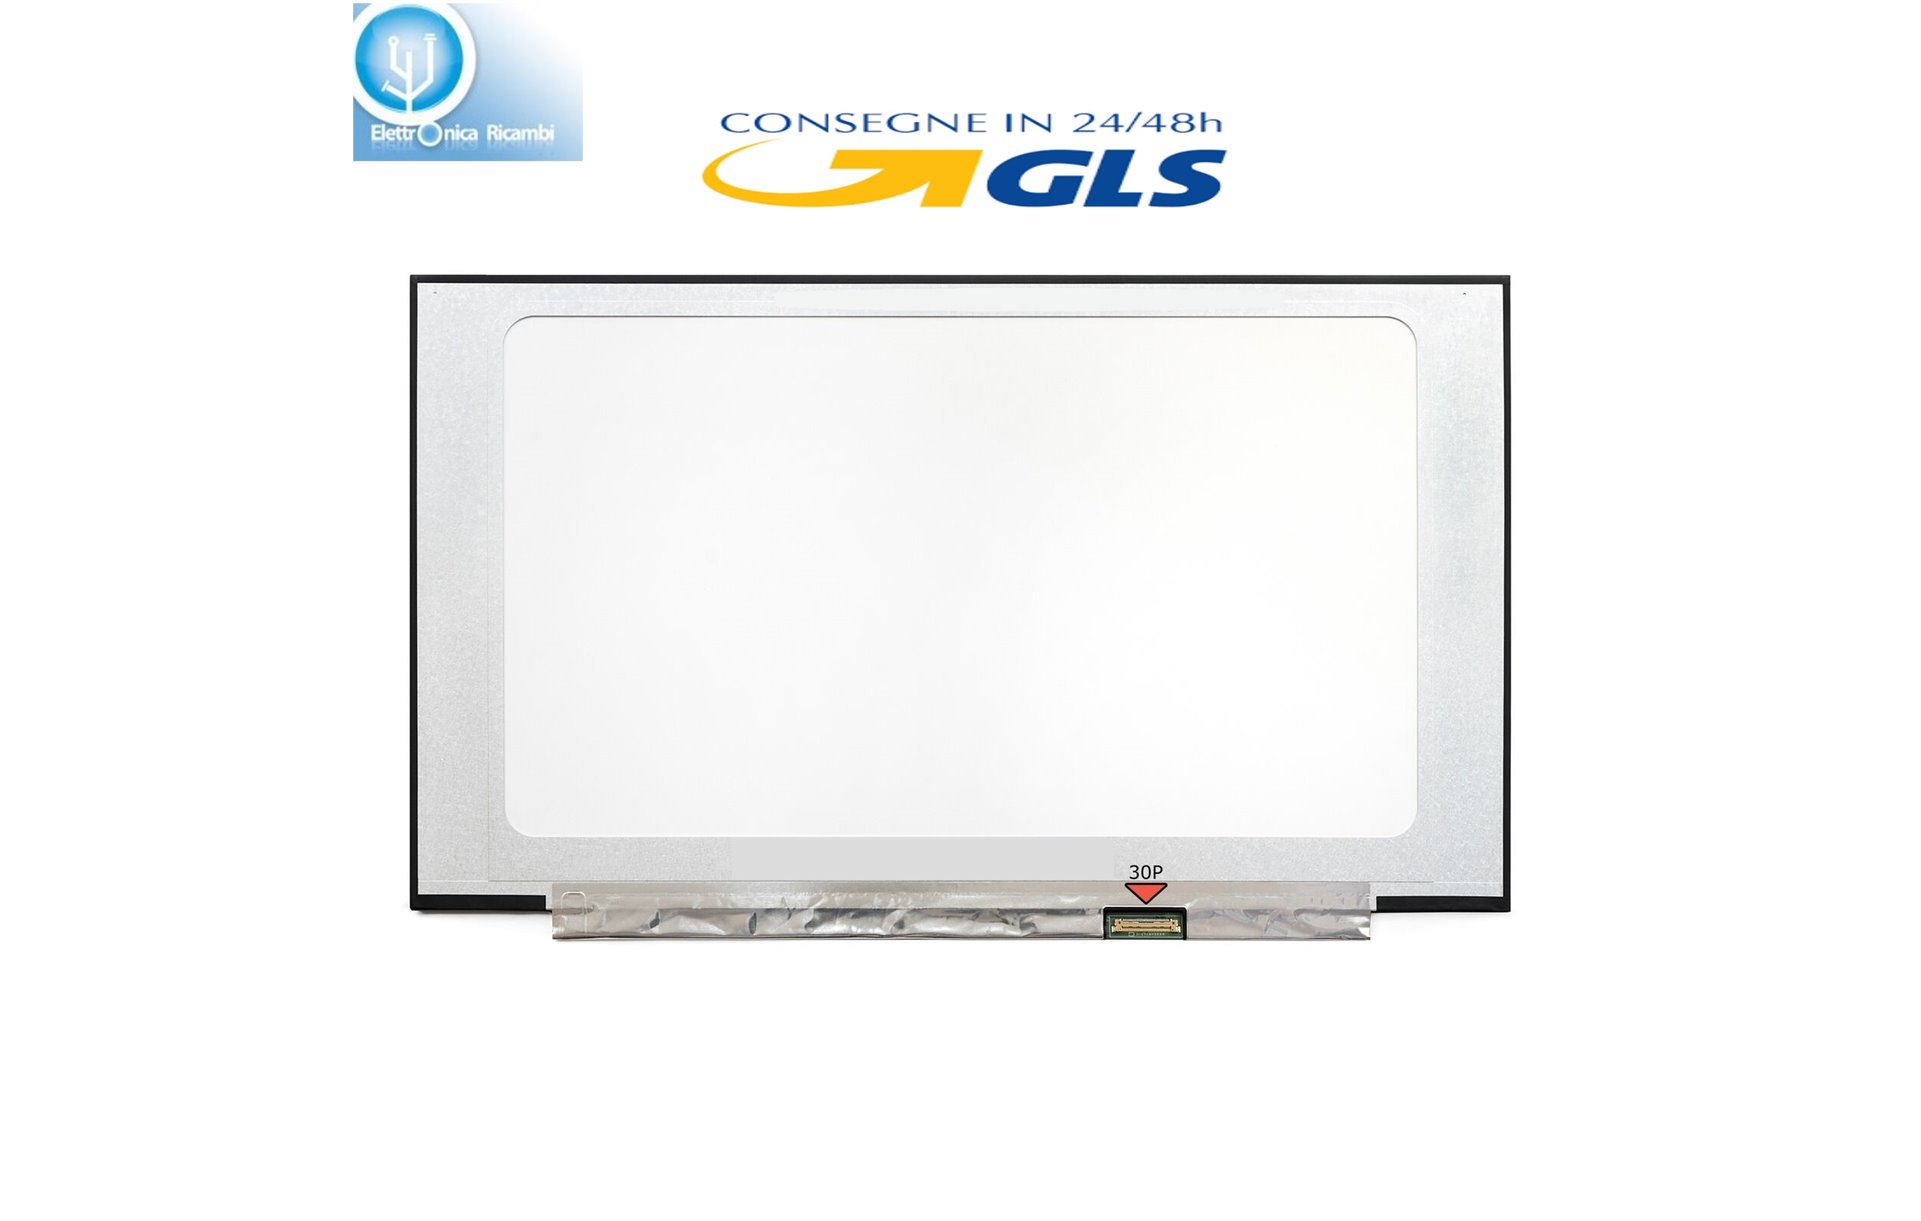 DISPLAY LCD ASUS VIVOBOOK S530UF SERIES 15.6 WideScreen (13.6"x7.6")  LED 30 pin IPS